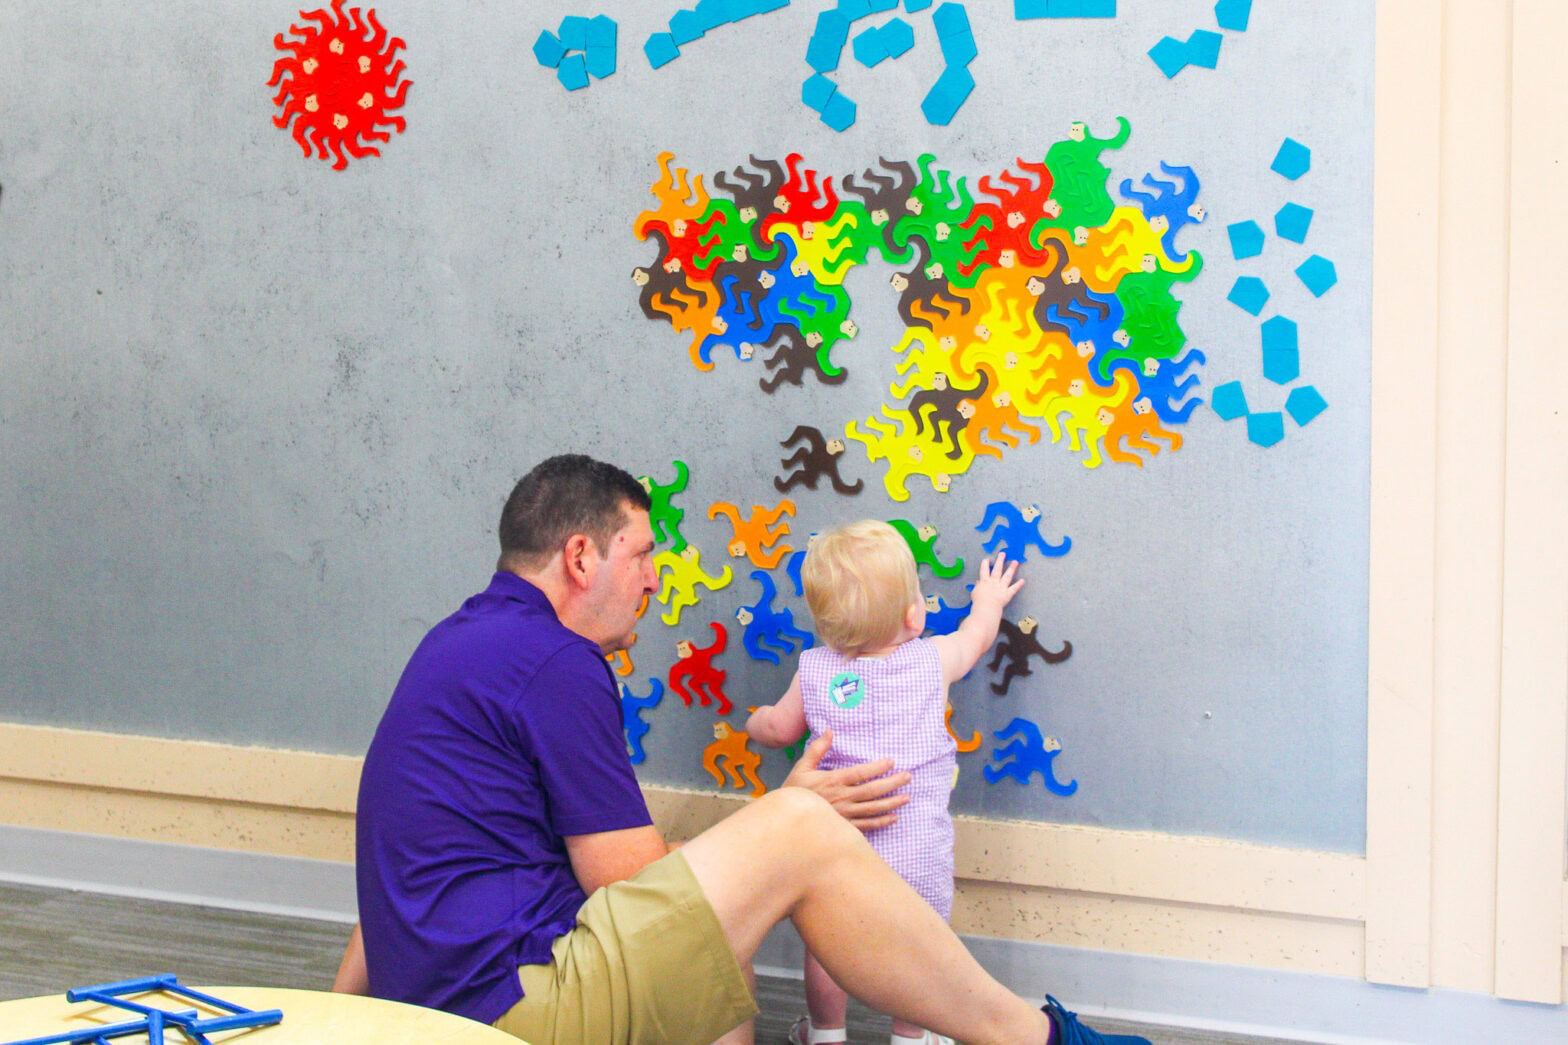 A father playing with his child at the magnet wall